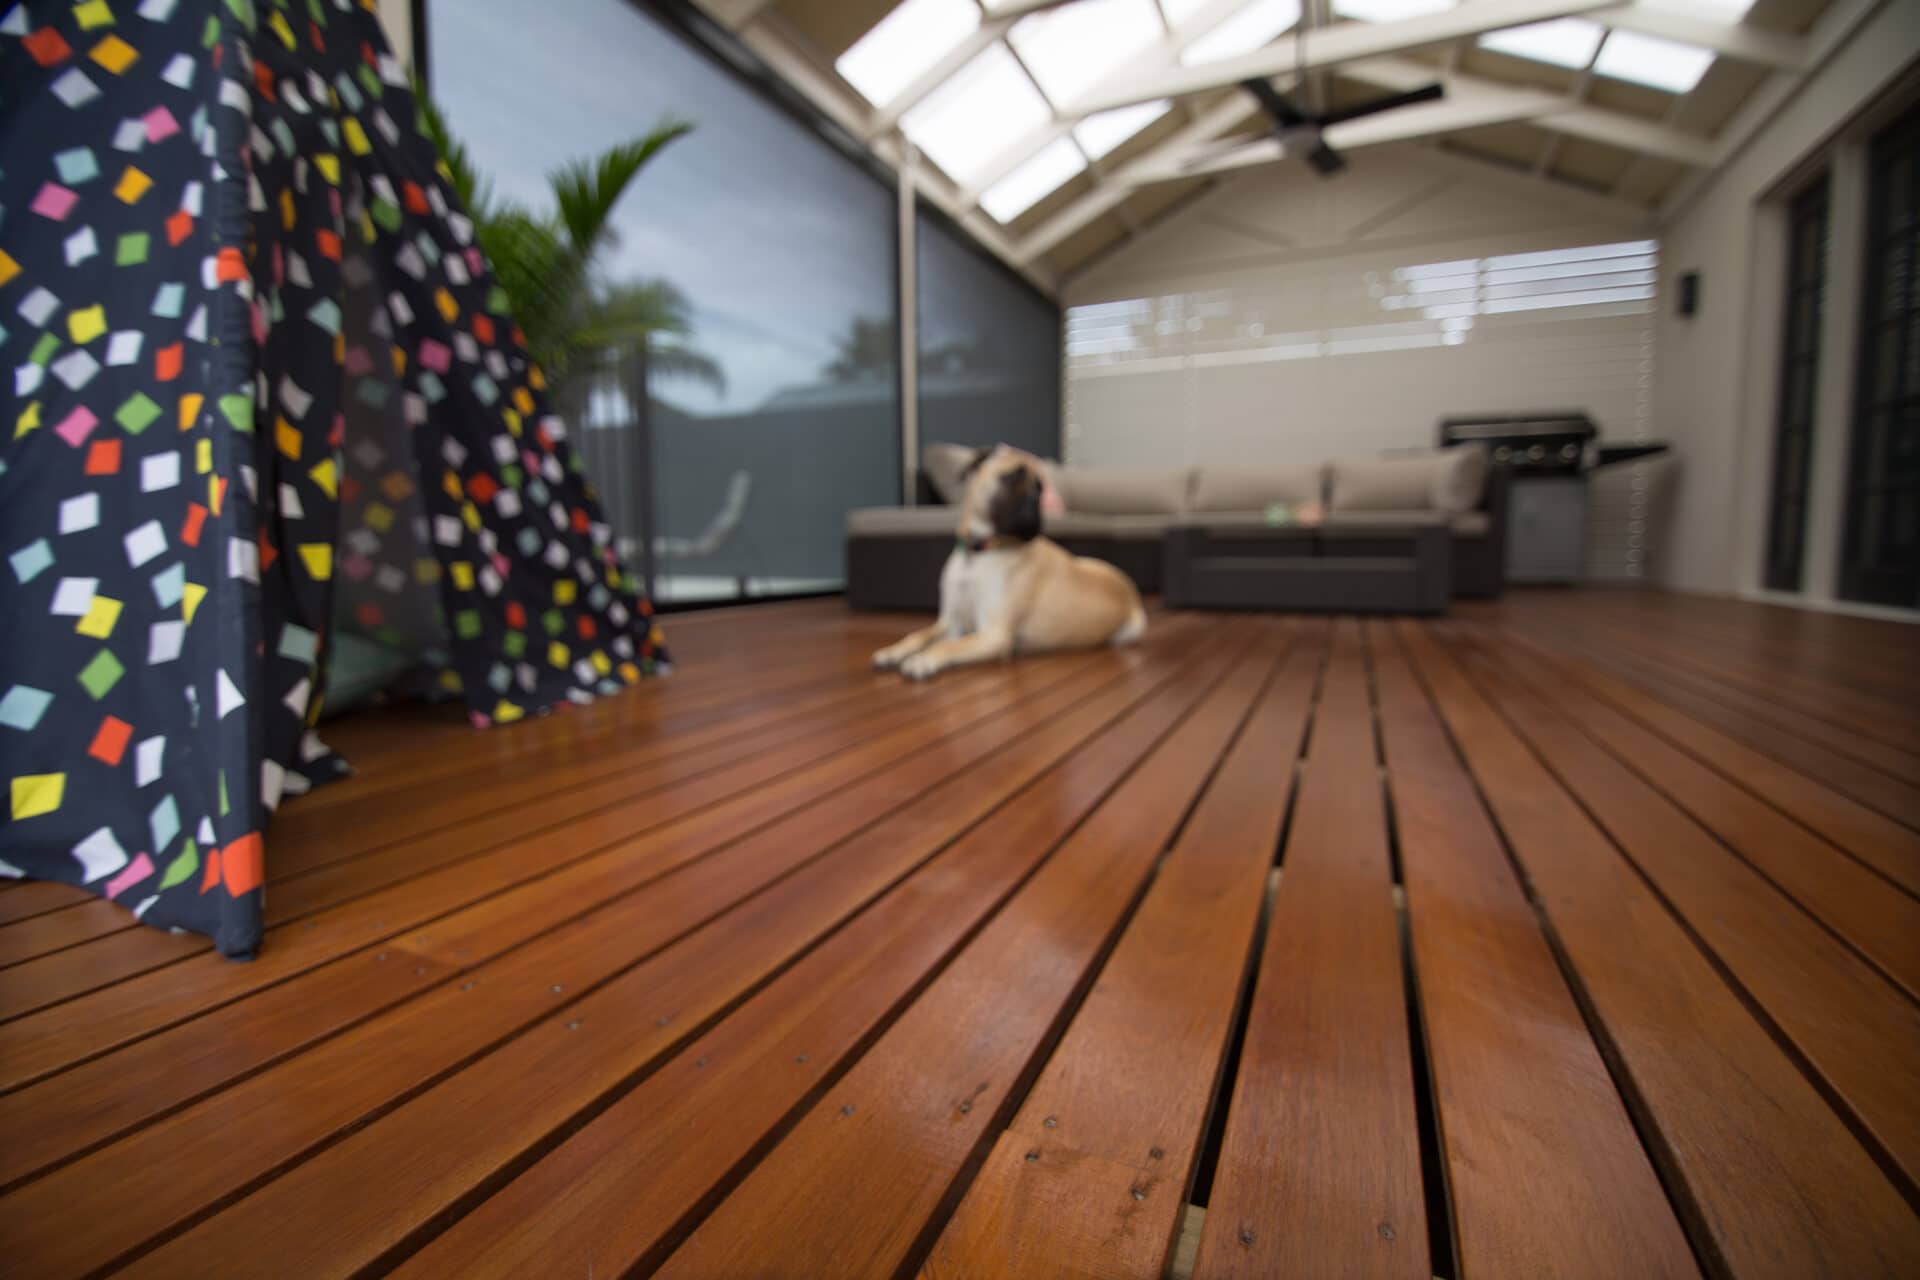 Timber decking is easy to maintain